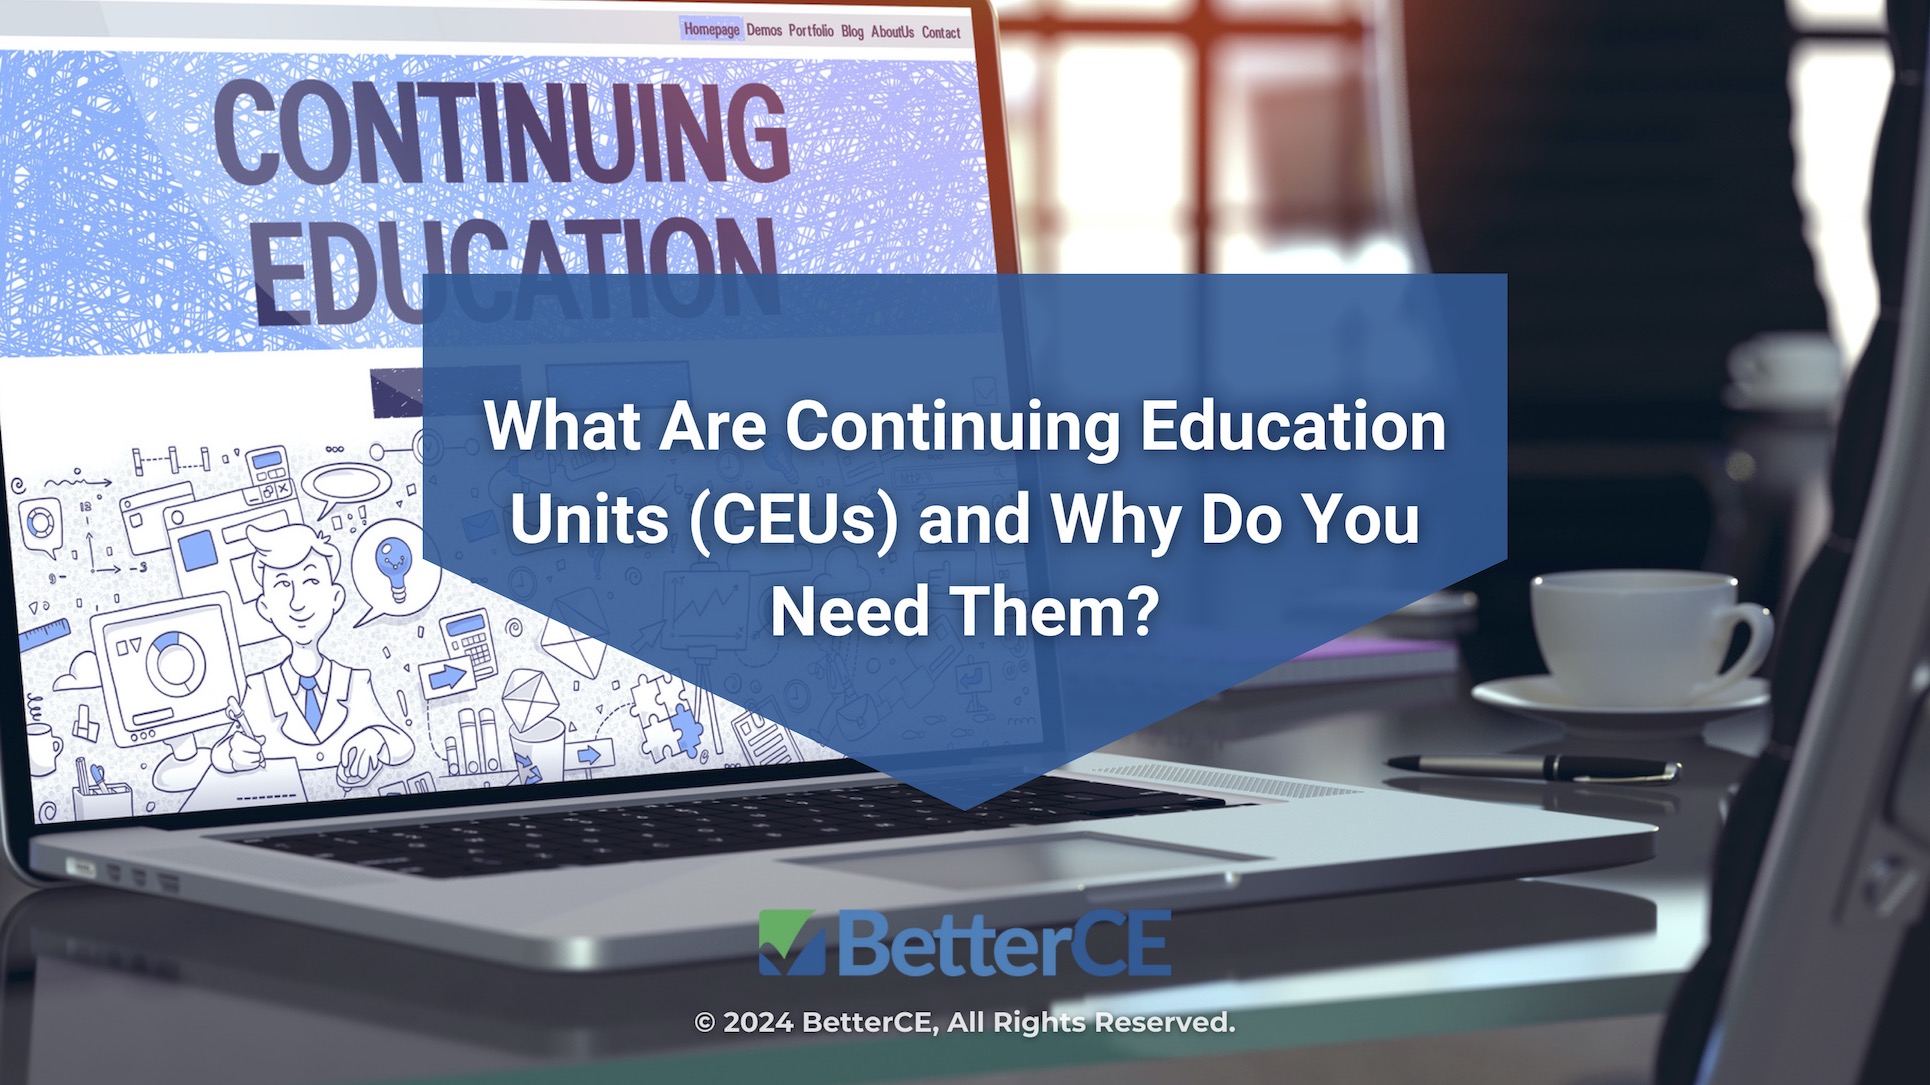 Featured: Continuing education landing page on laptop- What are continuing education units (CEUs) and why do you need them?